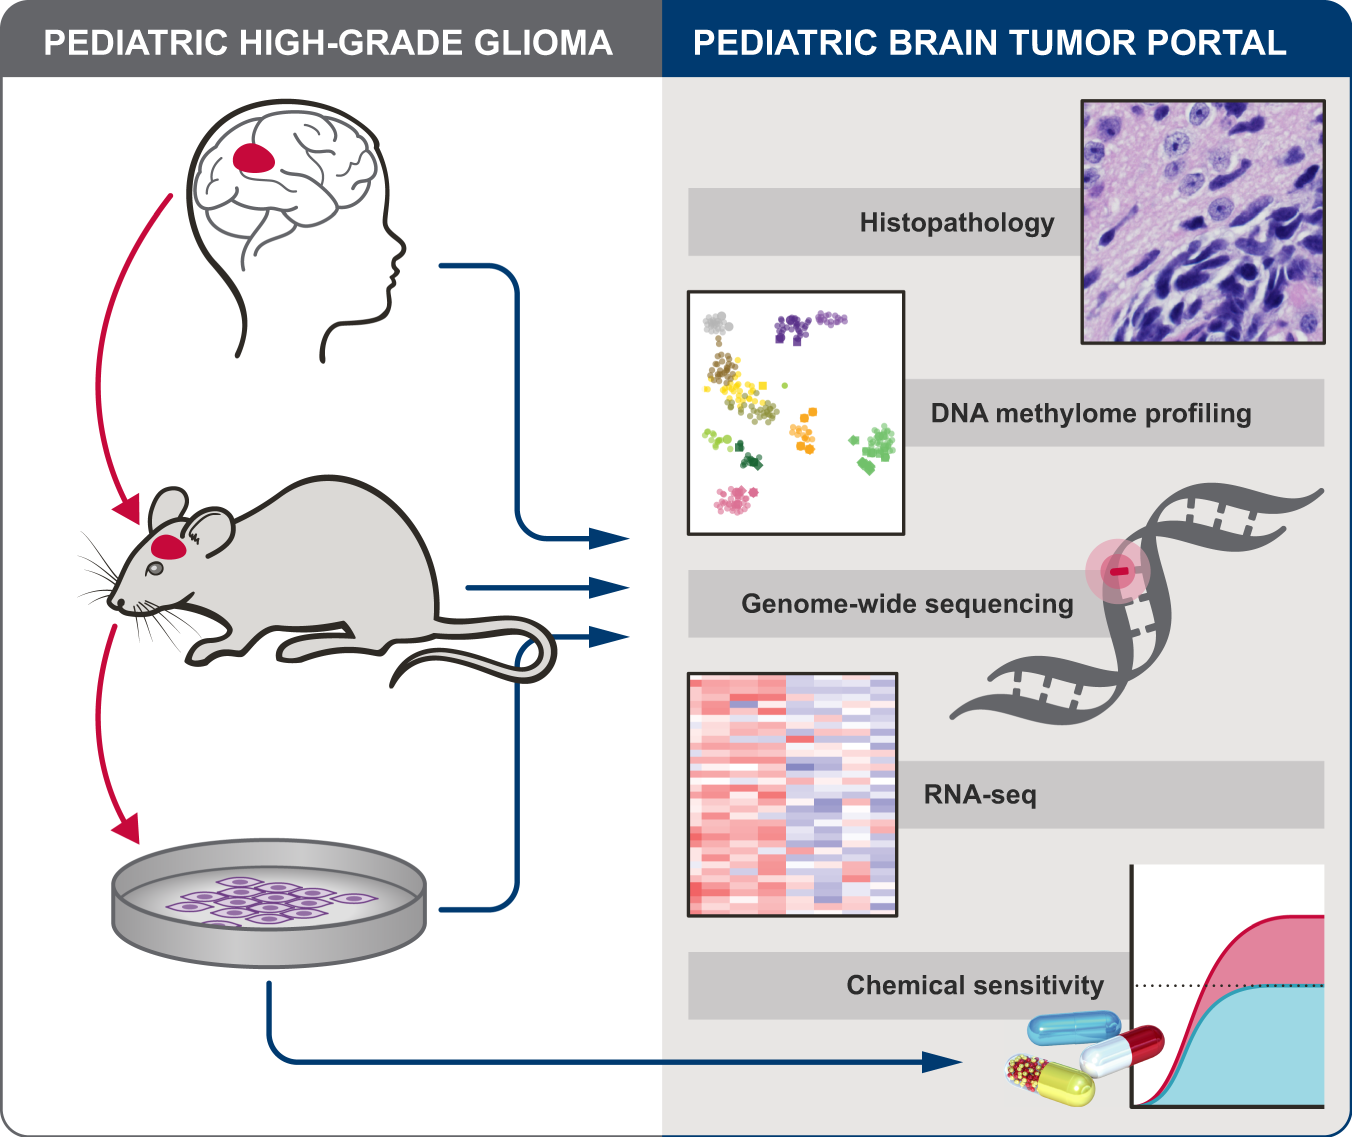 Patient-derived models recapitulate heterogeneity of molecular signatures  and drug response in pediatric high-grade glioma